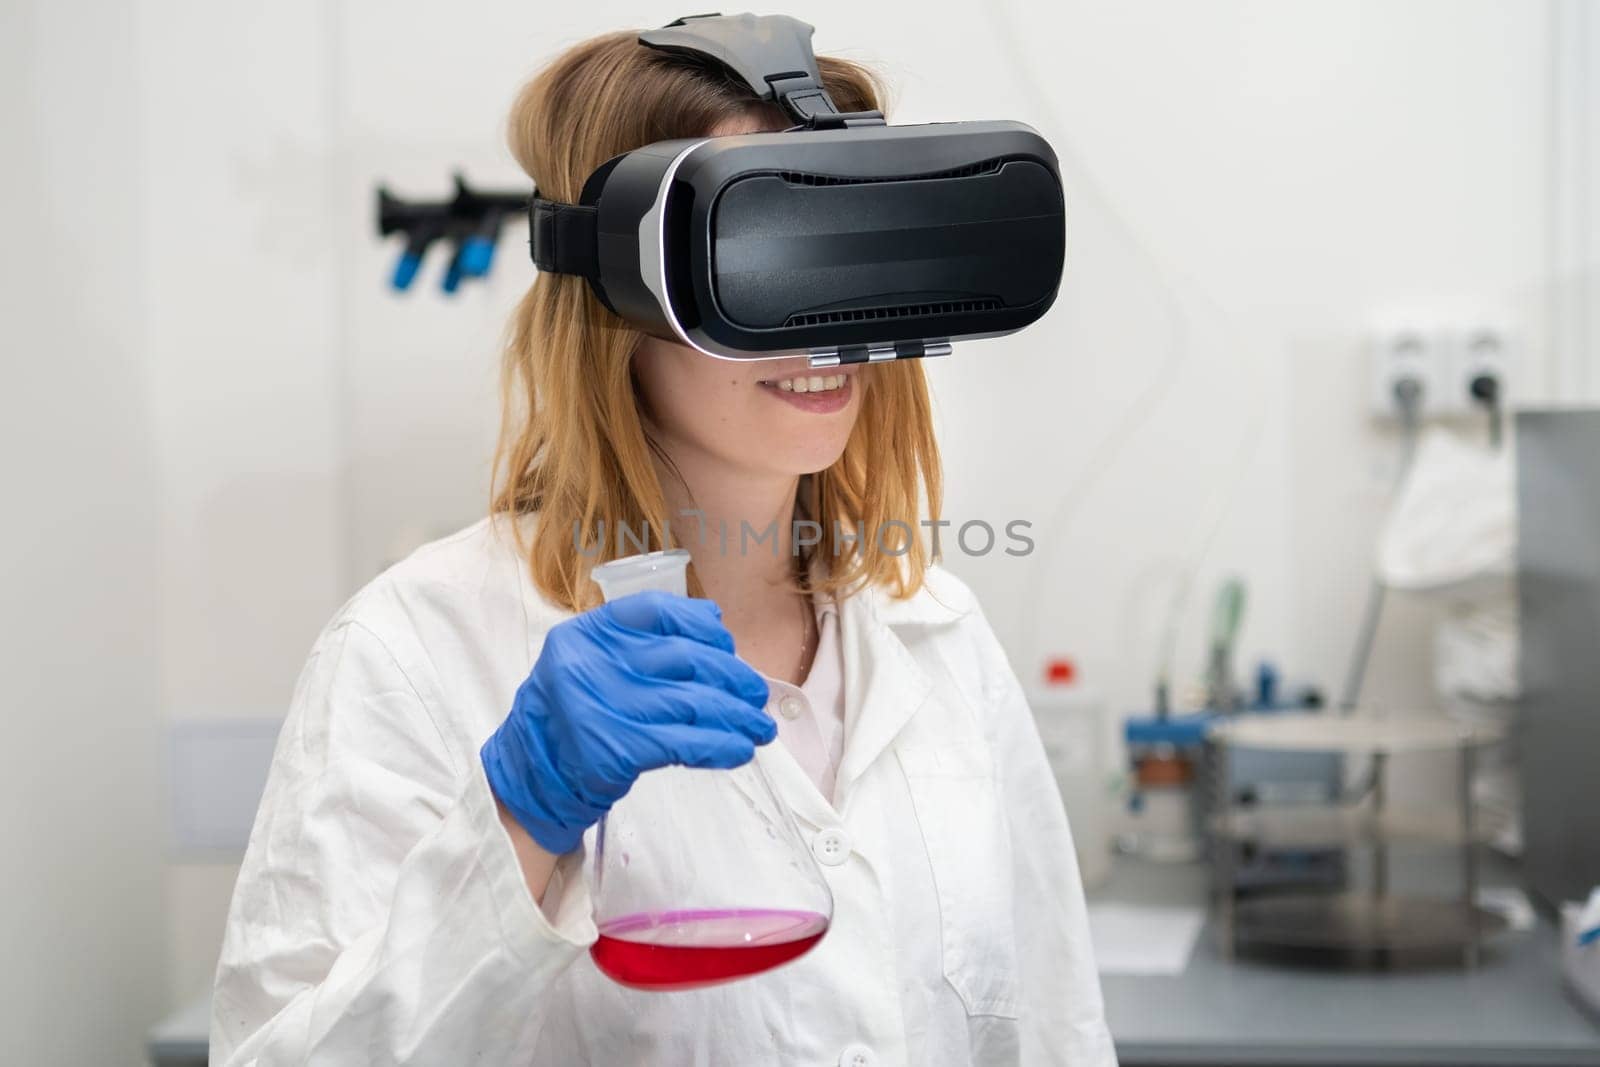 Scientist in VR googles, lab coat and rubber gloves manages the virtual interface by vladimka